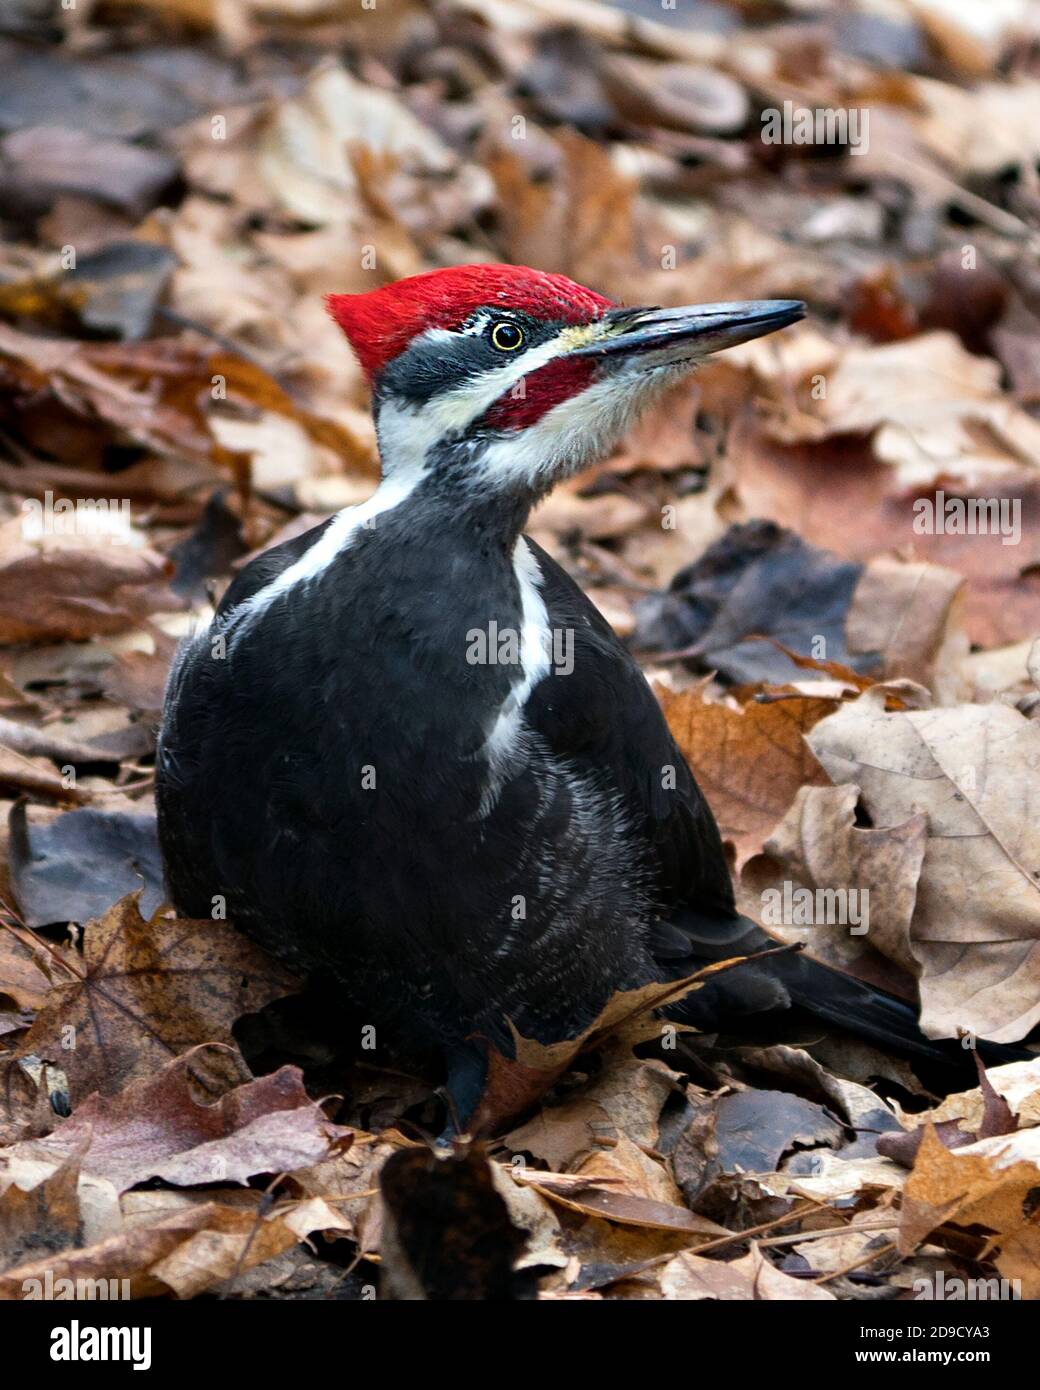 Woodpecker bird close-up profile view with a brown leaves background in its environment and habitat. Stock Photo